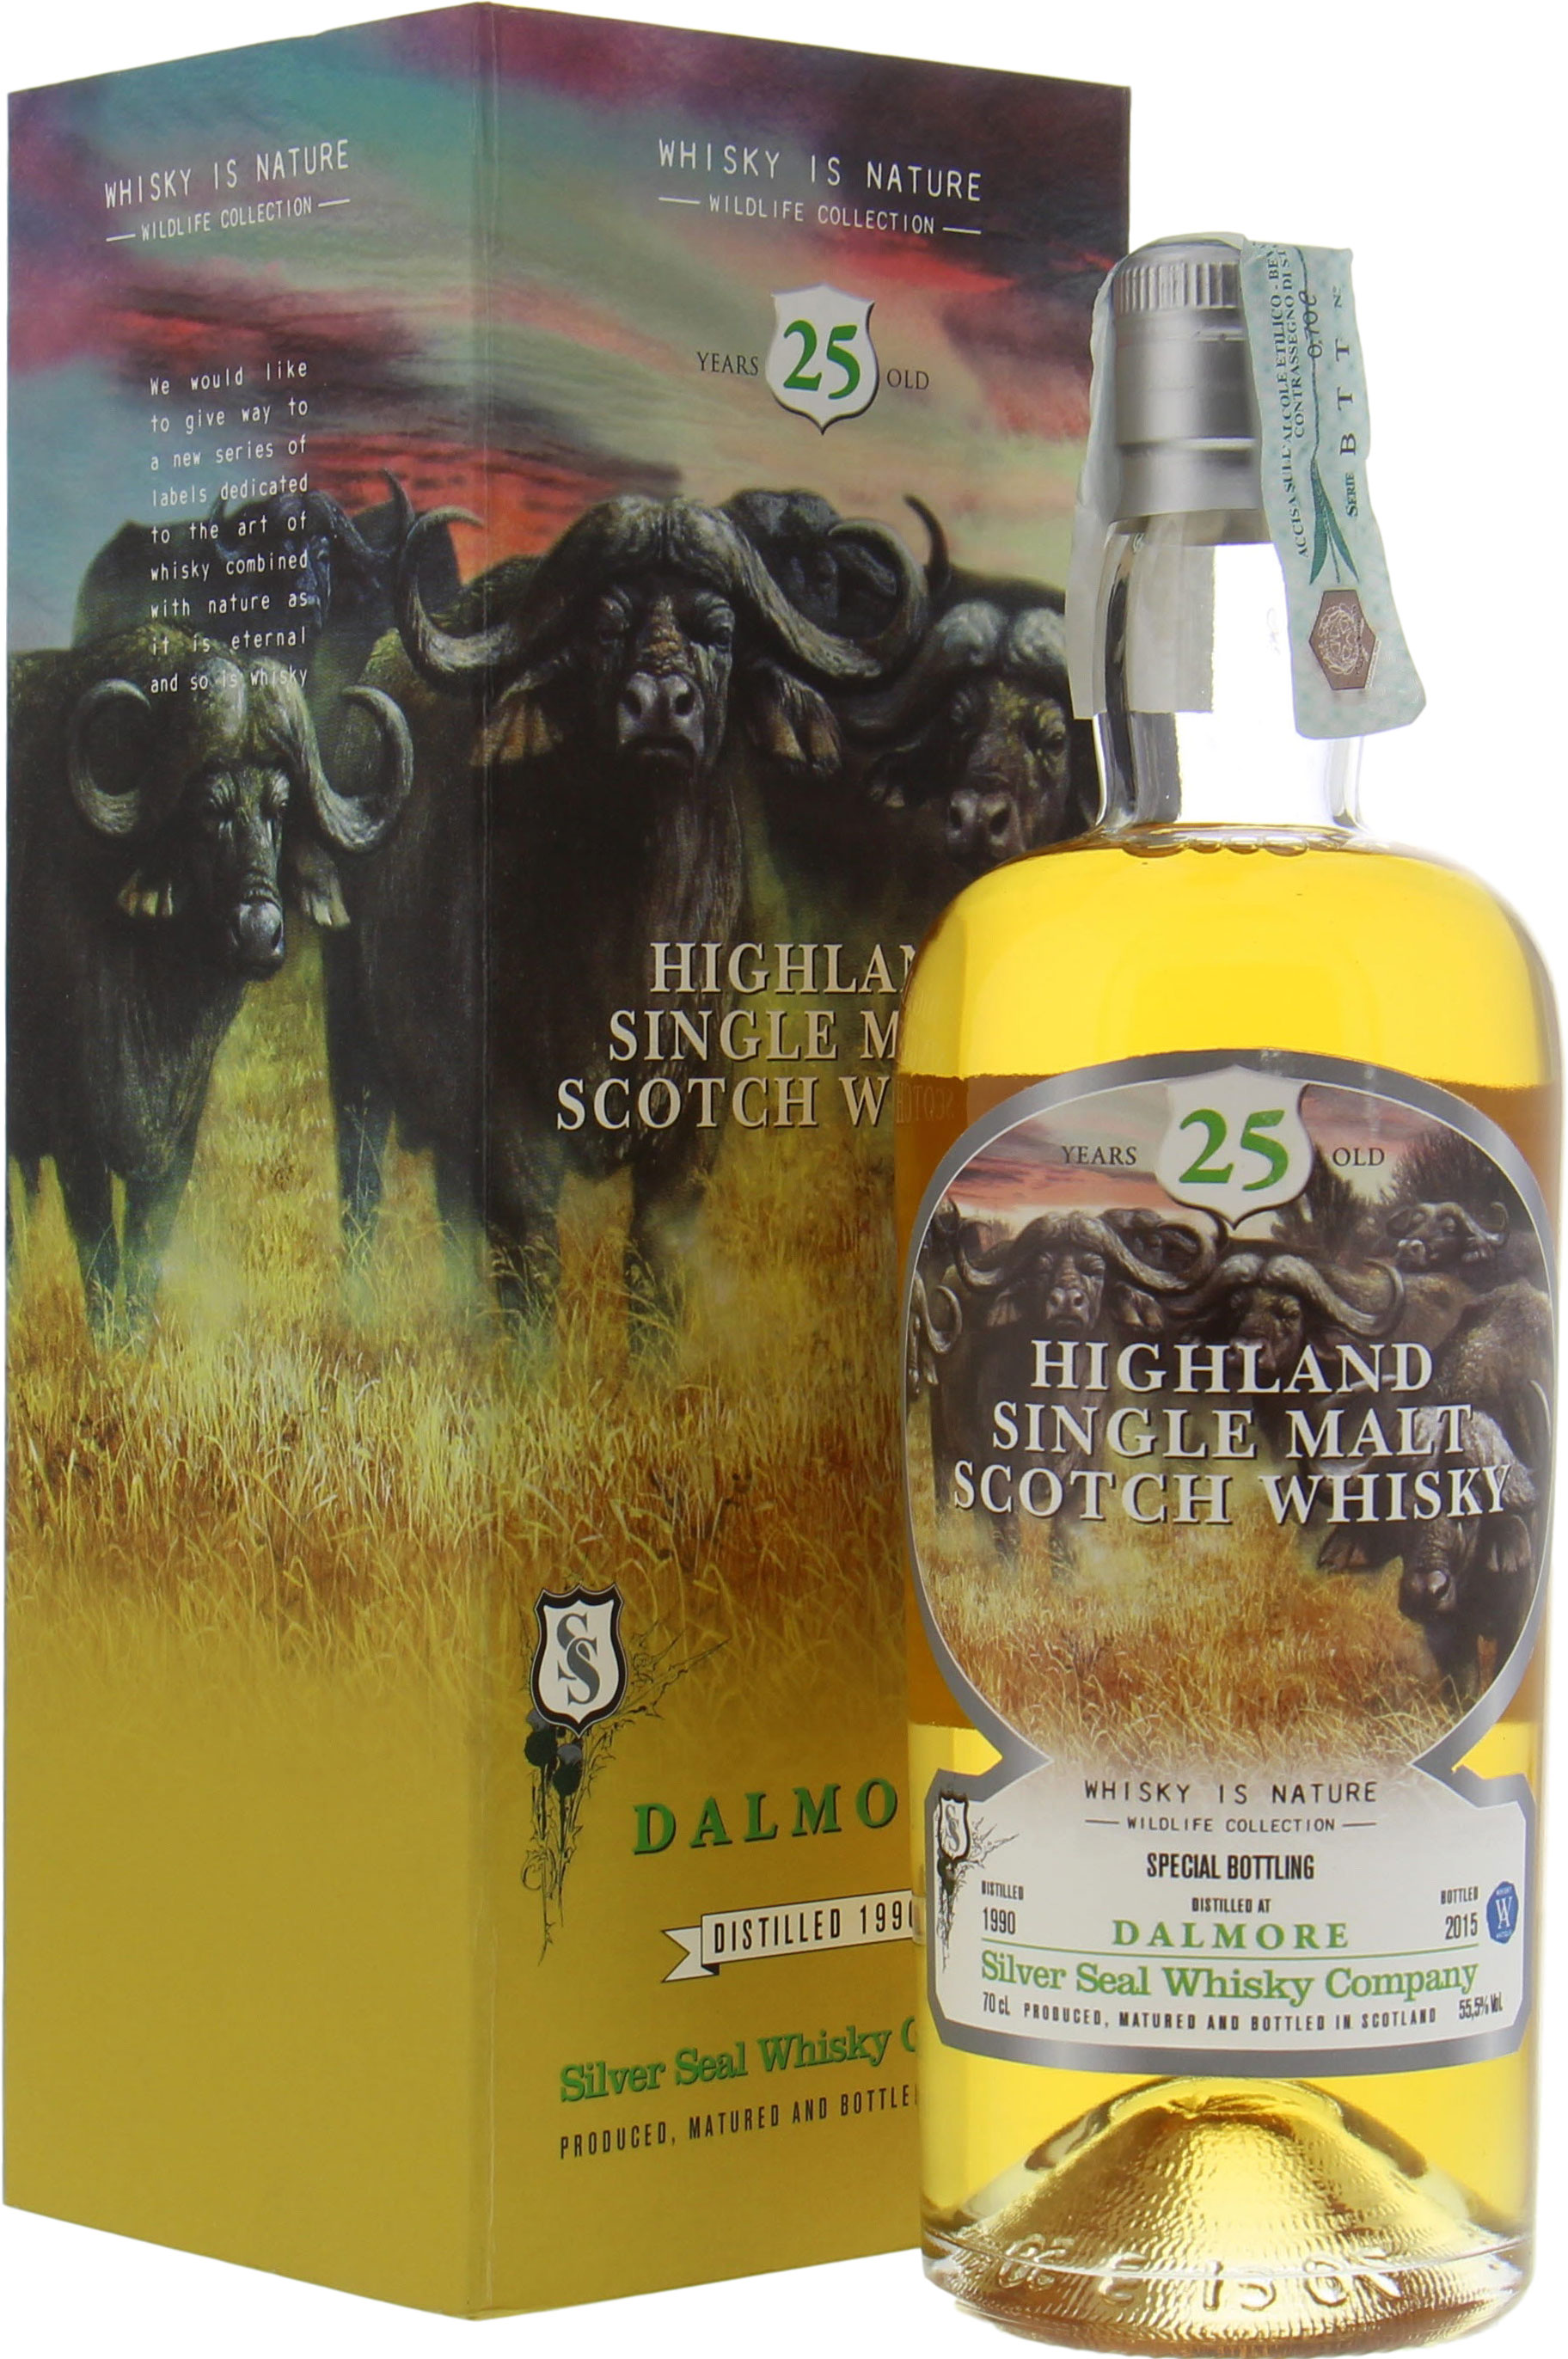 Dalmore - 25 Years Old Silver Seal Whisky Is Nature Cask 66 55.5% 1990